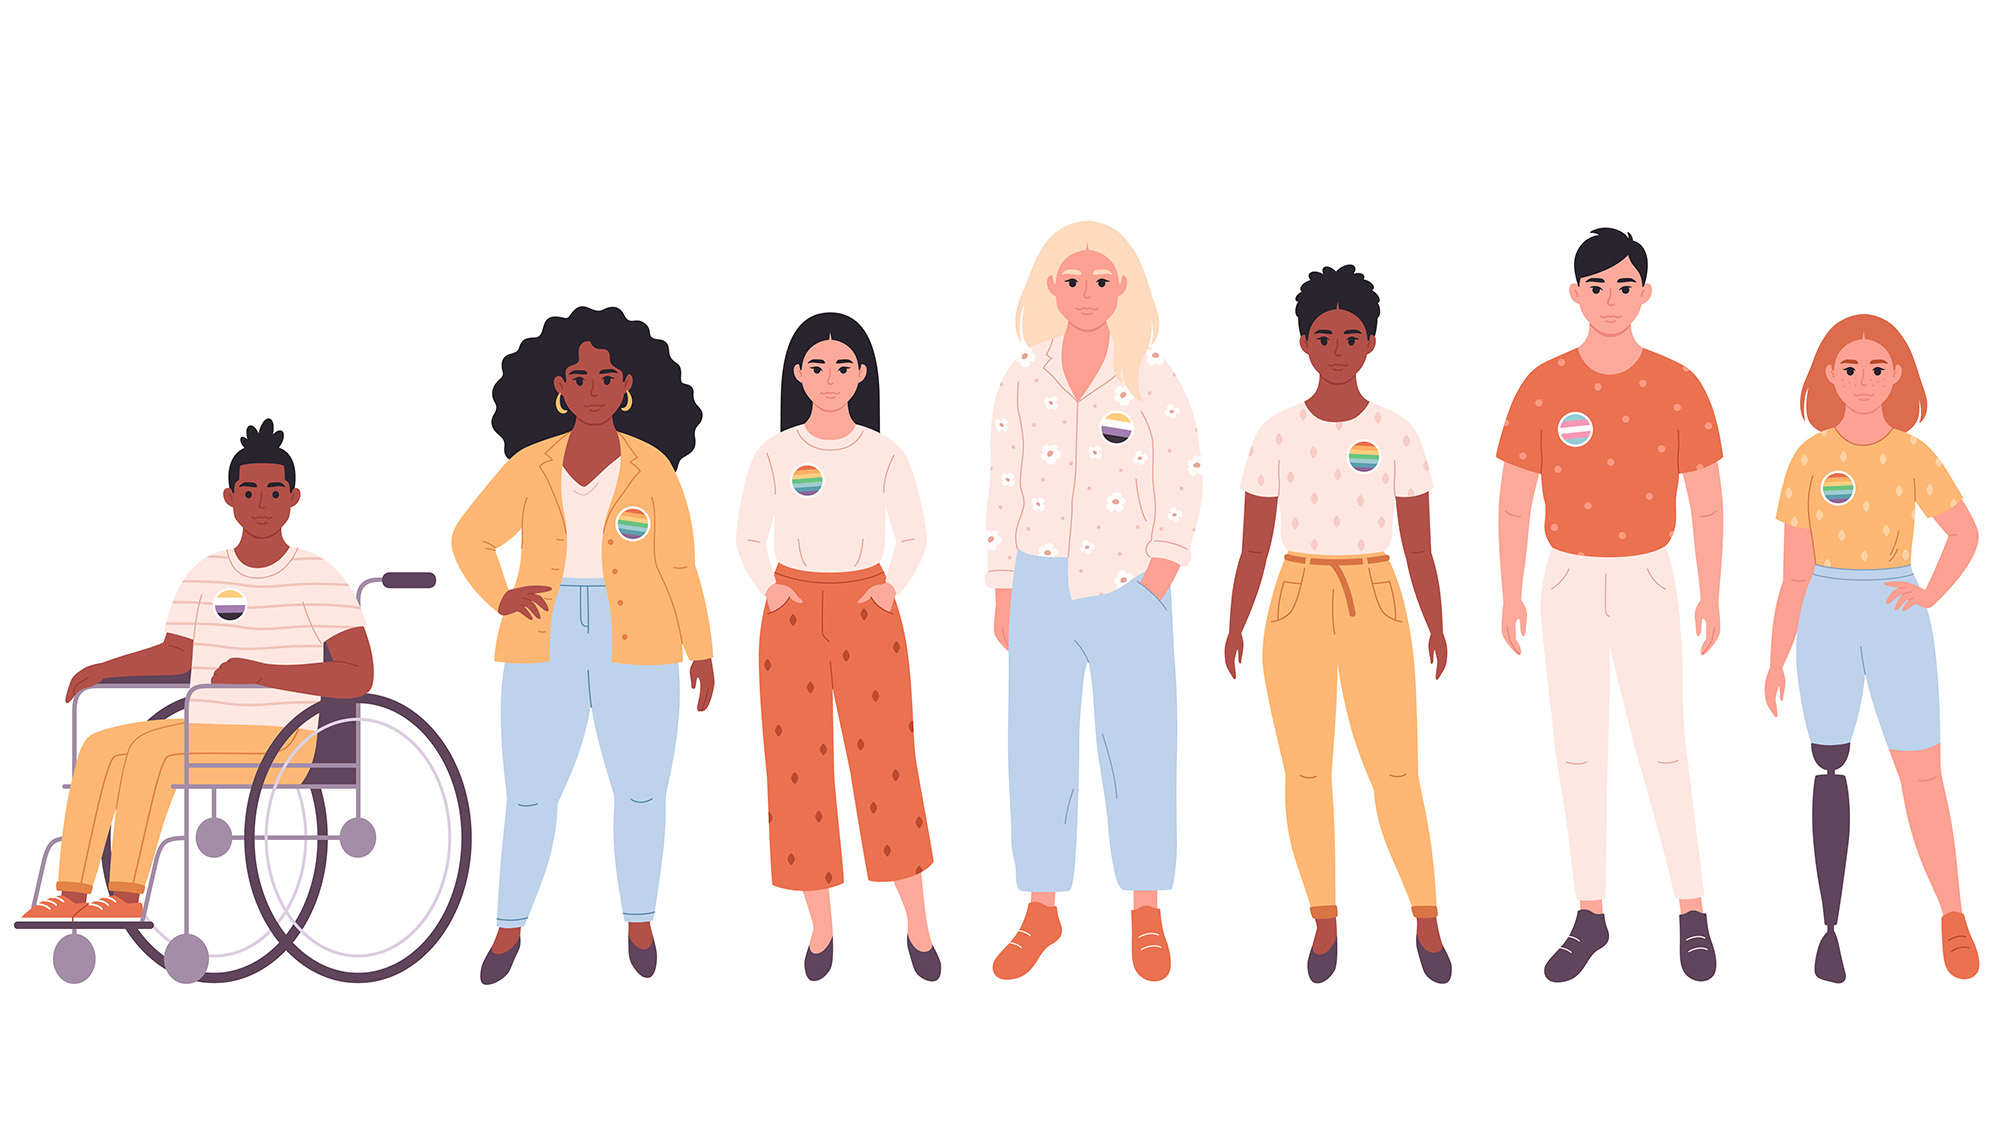 Illustration of a diverse group of individuals, including a wheelchair user and person with a prosthetic leg